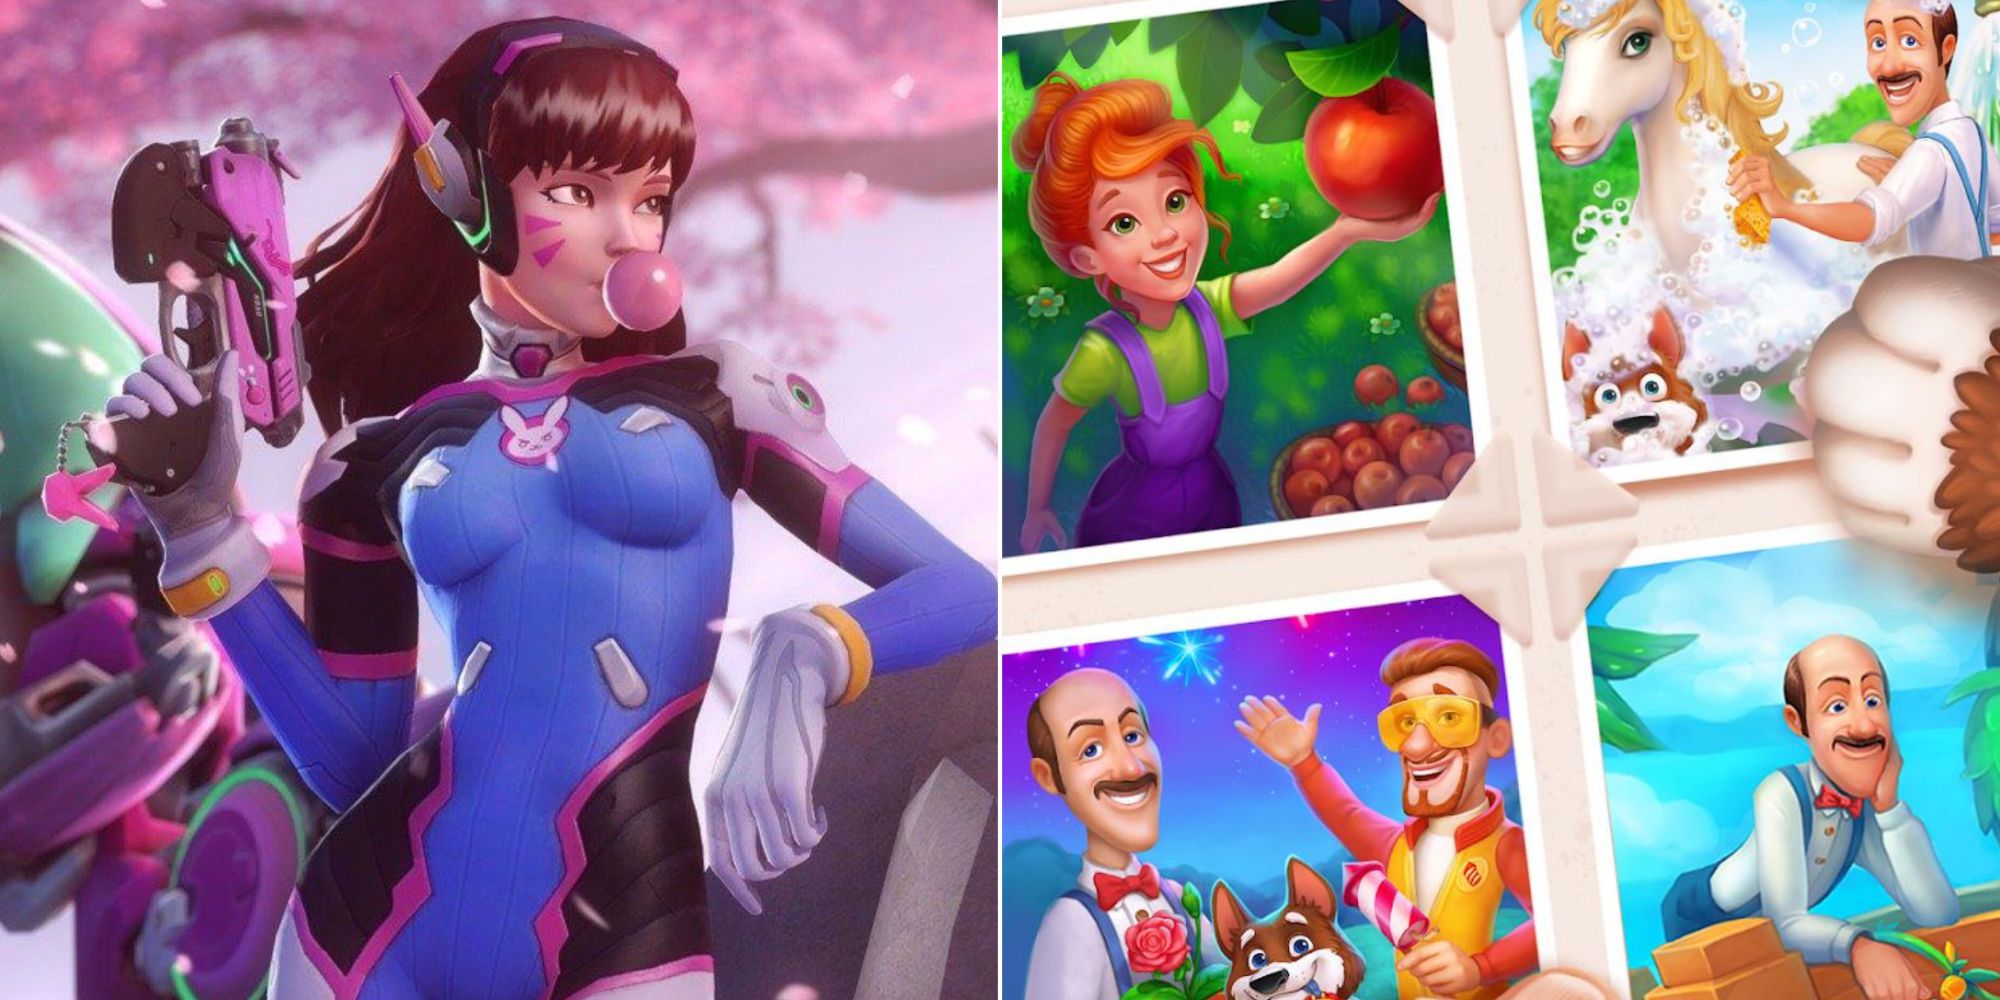 D.Va from Overwatch blowing a bubble gum (left) and Gardenscapes cover art (right)